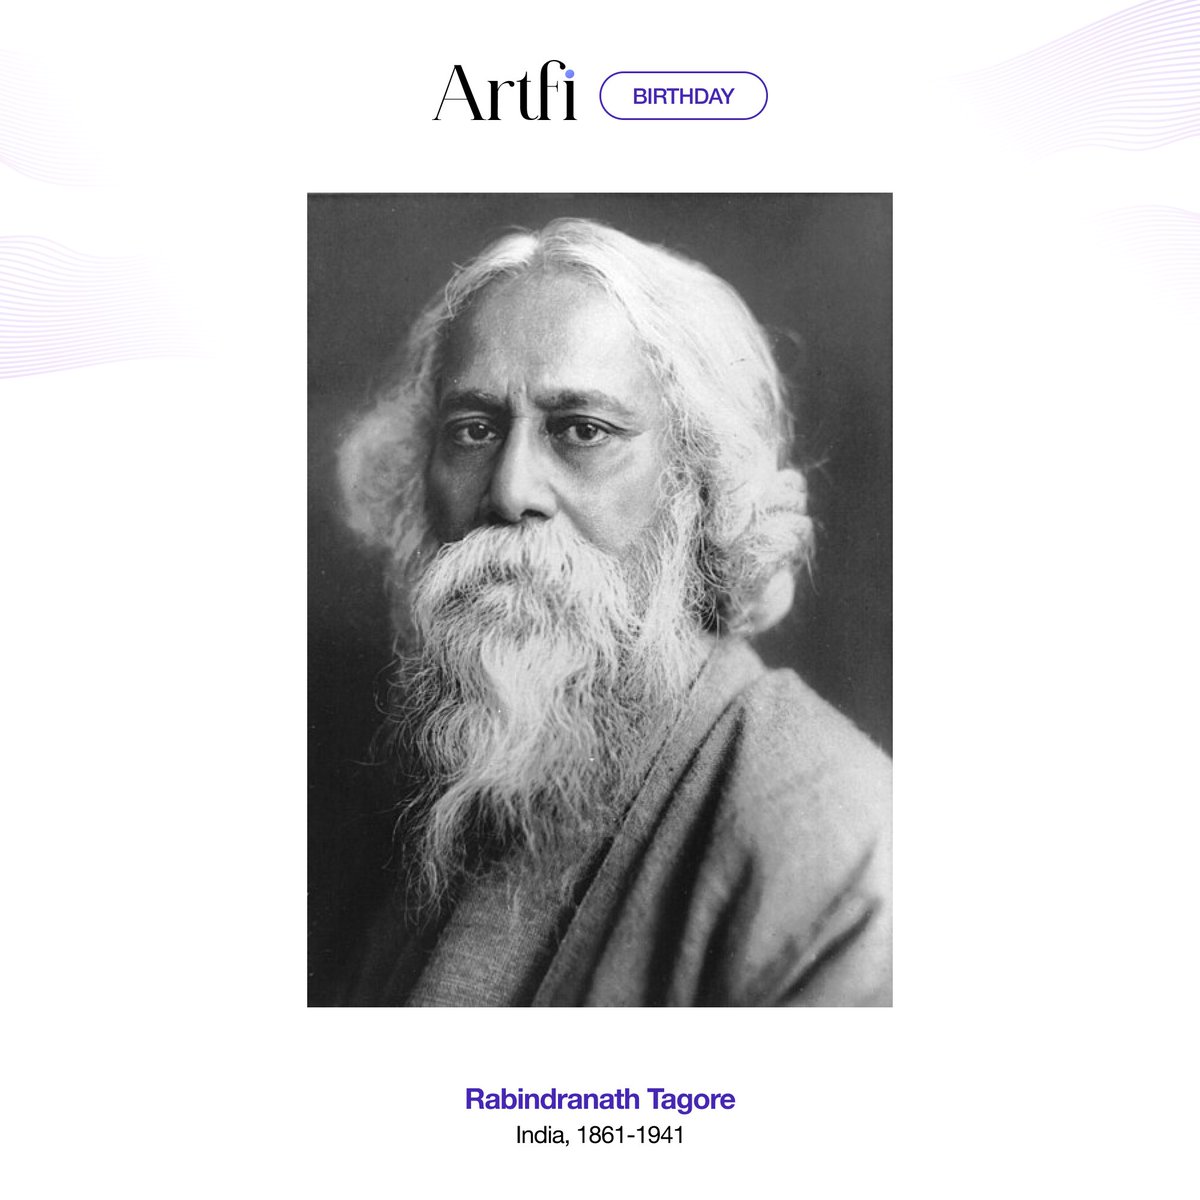 Celebrating Rabindranath Tagore, a beacon of wisdom and creativity whose poetry and philosophy continue to inspire us across the globe. 🌟#RabindranathTagore #Artfi